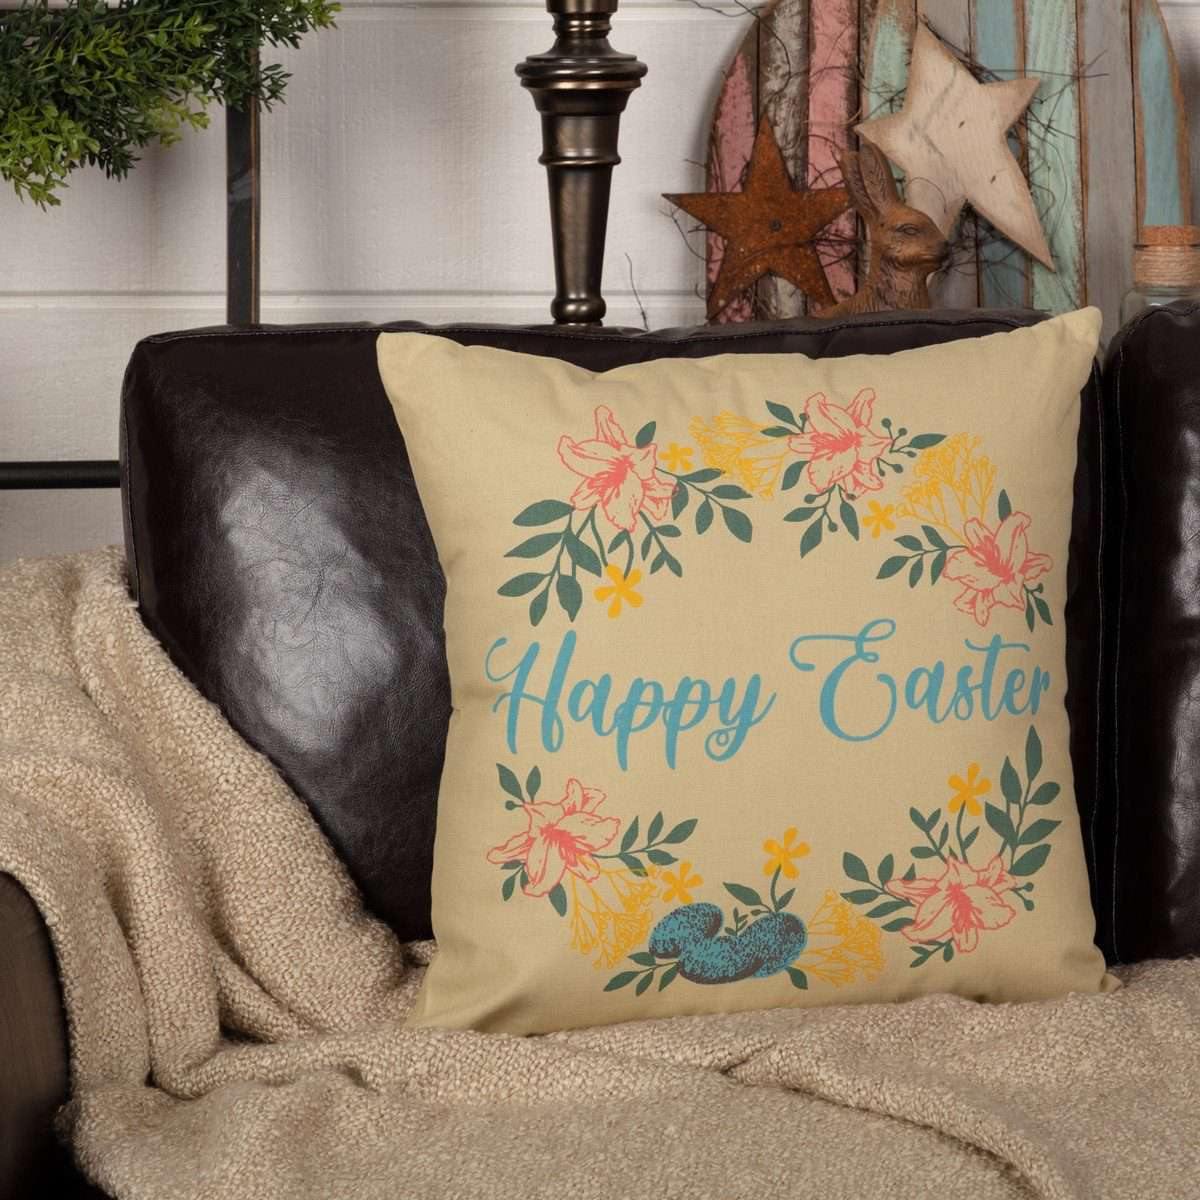 Sawyer Mill Happy Easter Wreath Pillow 18x18 VHC Brands